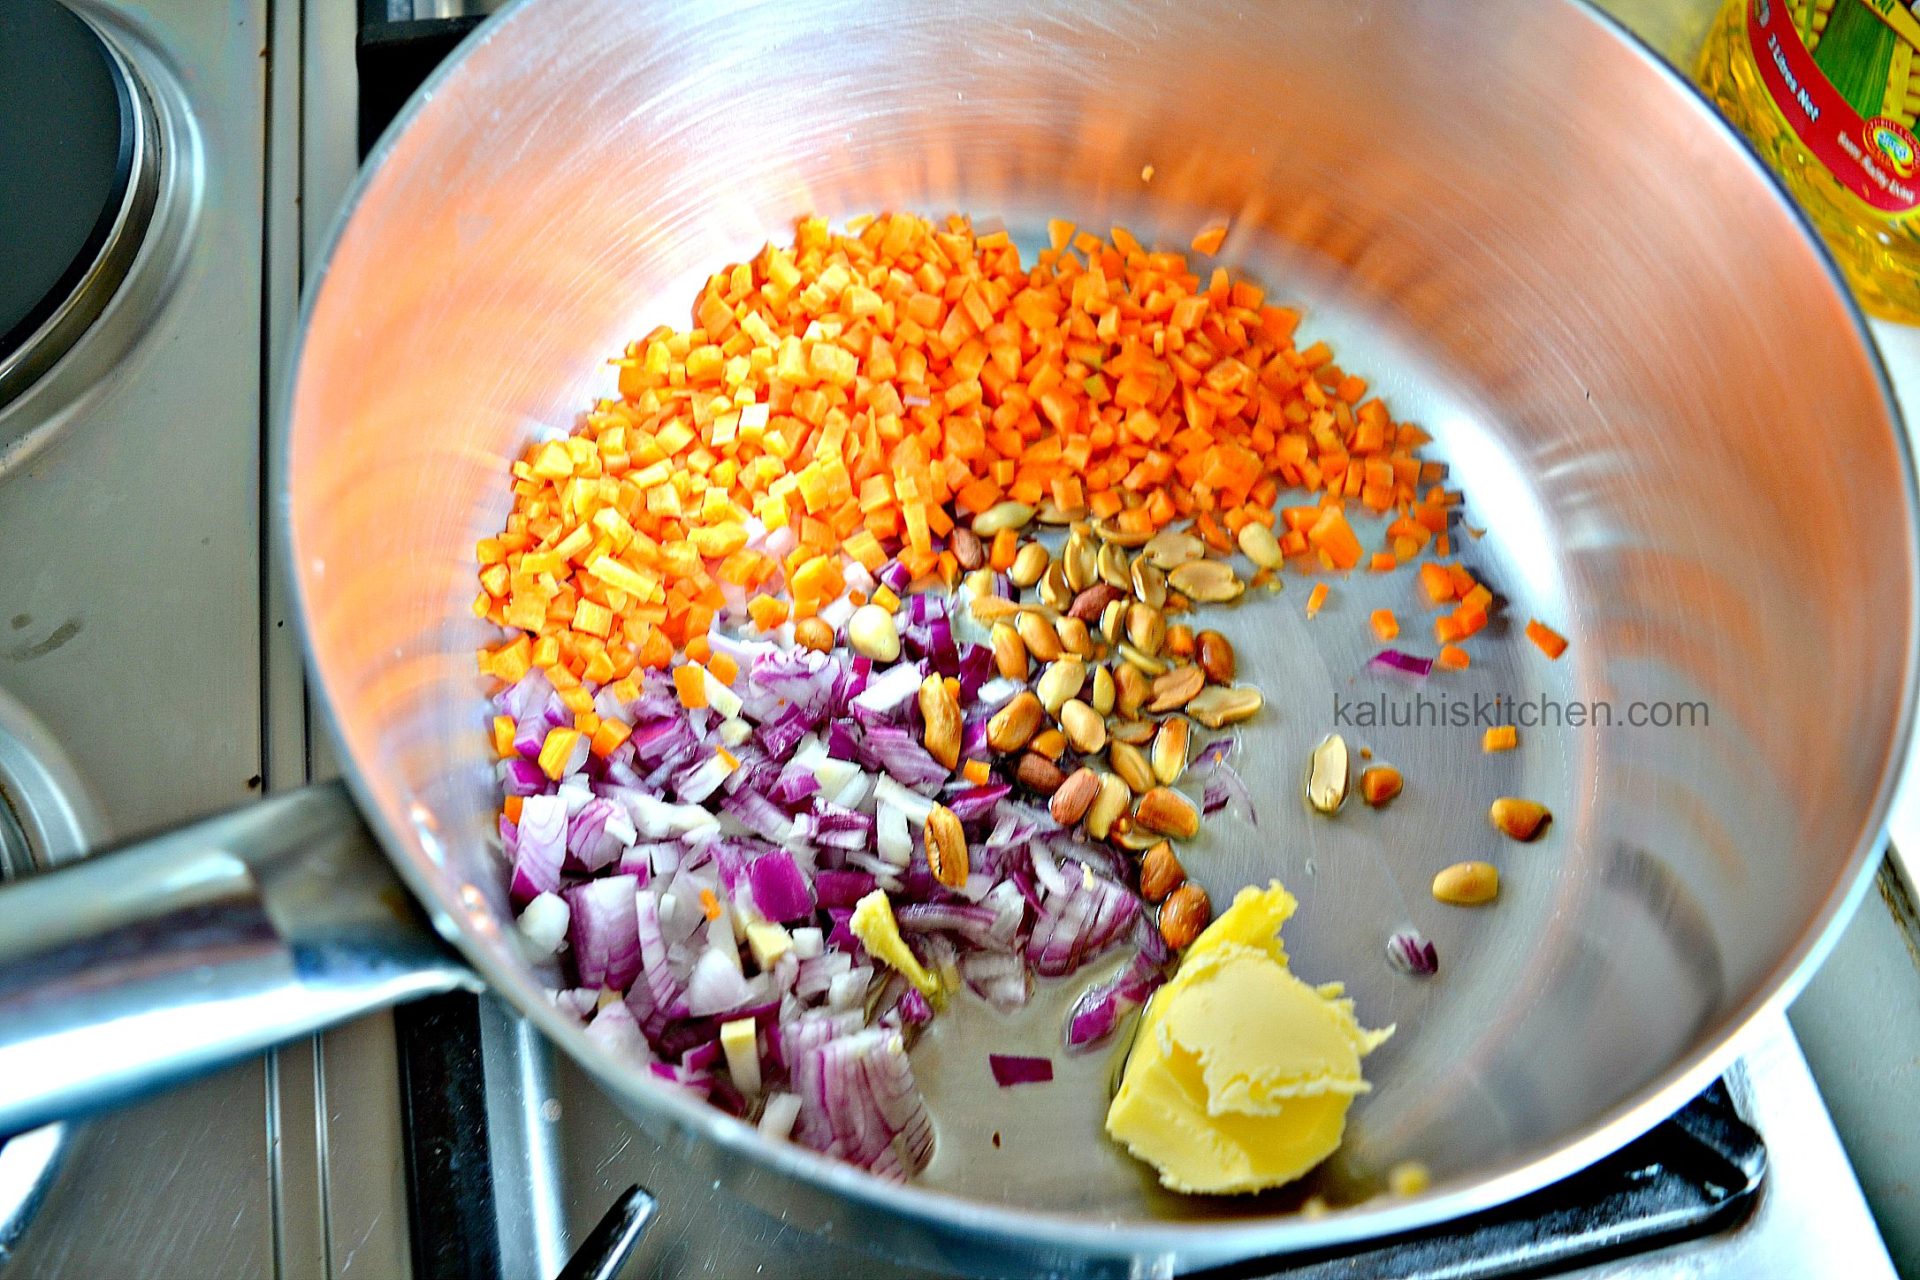 sauteeing the carrots , onions and peanuts not only softens them but greatly develops their flavor_kaluhiskitchen.com